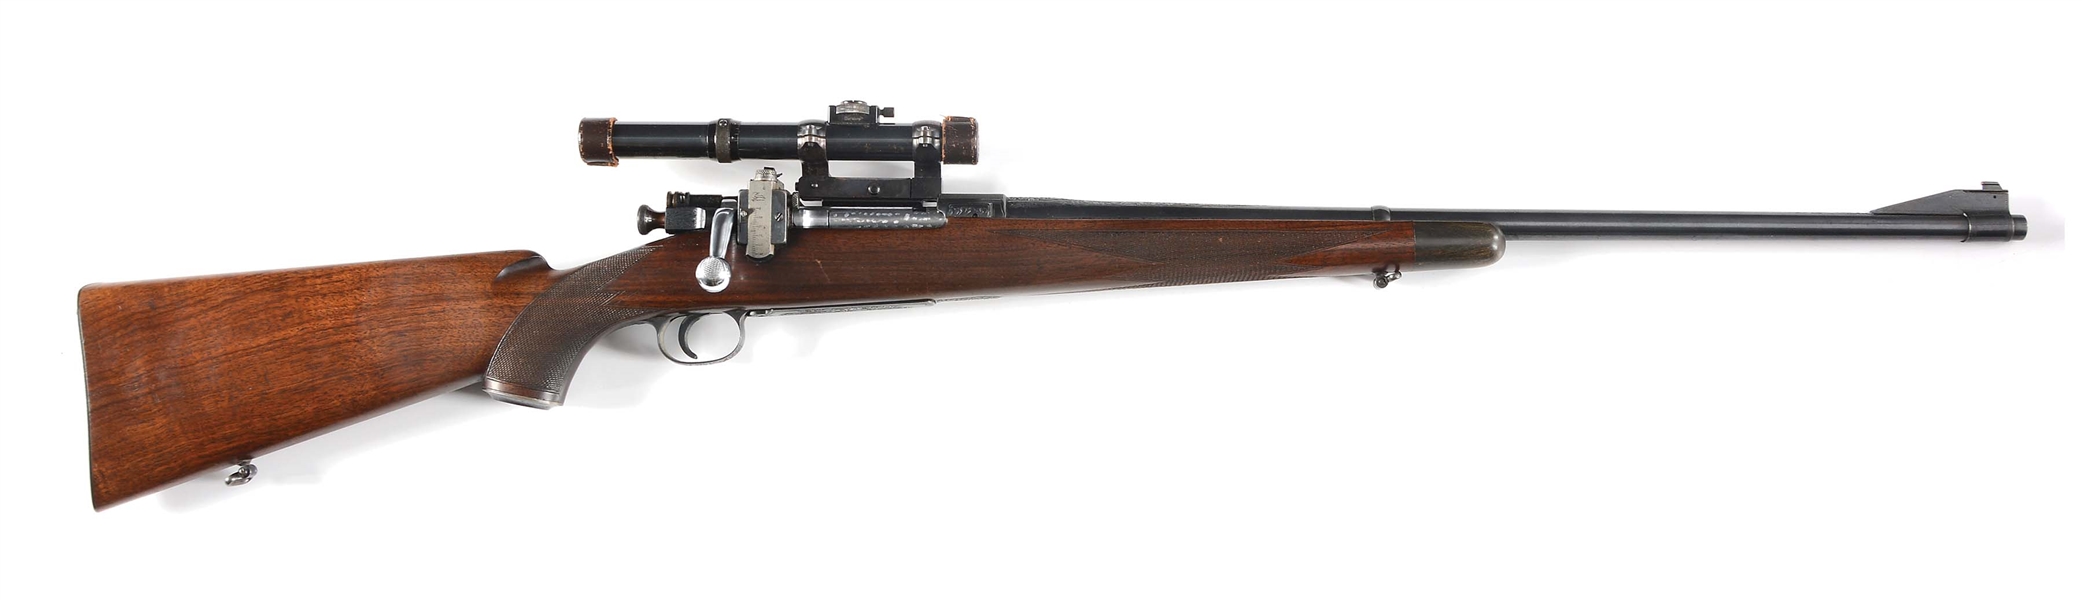 (C) SCARCE FACTORY ENGRAVED (WILLIAM GOUGH) R.F. SEDGLEY INC. SPRINGFIELD BOLT ACTION RIFLE WITH SCOPE.